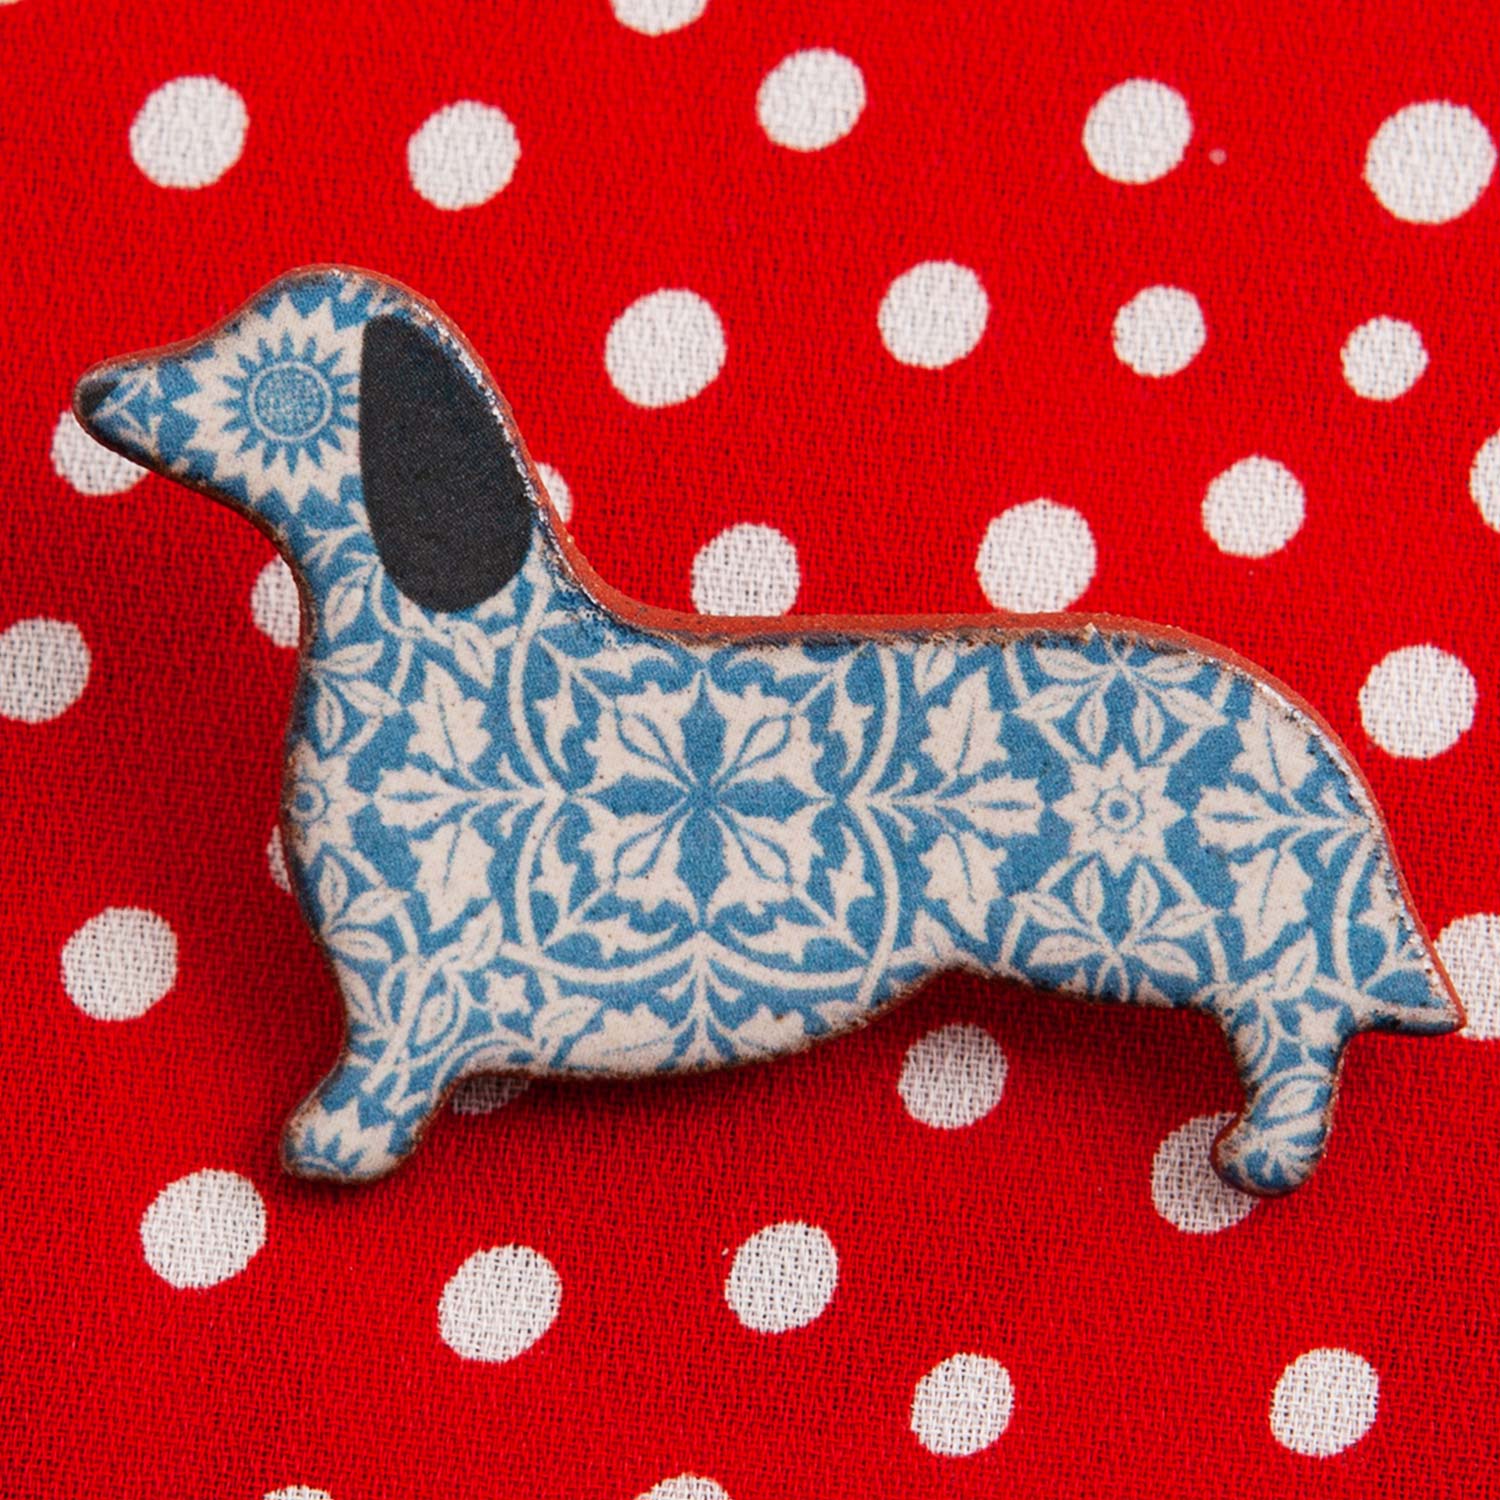 Dog Lover Gifts available at Dog Krazy Gifts – Ceramic Blue William Morris Dachshund Brooch by Mary Goldberg of Stockwell Ceramics, Just Part Of Our Collection Of Daxie Themed Gifts, Available At www.dogkrazygifts.co.uk